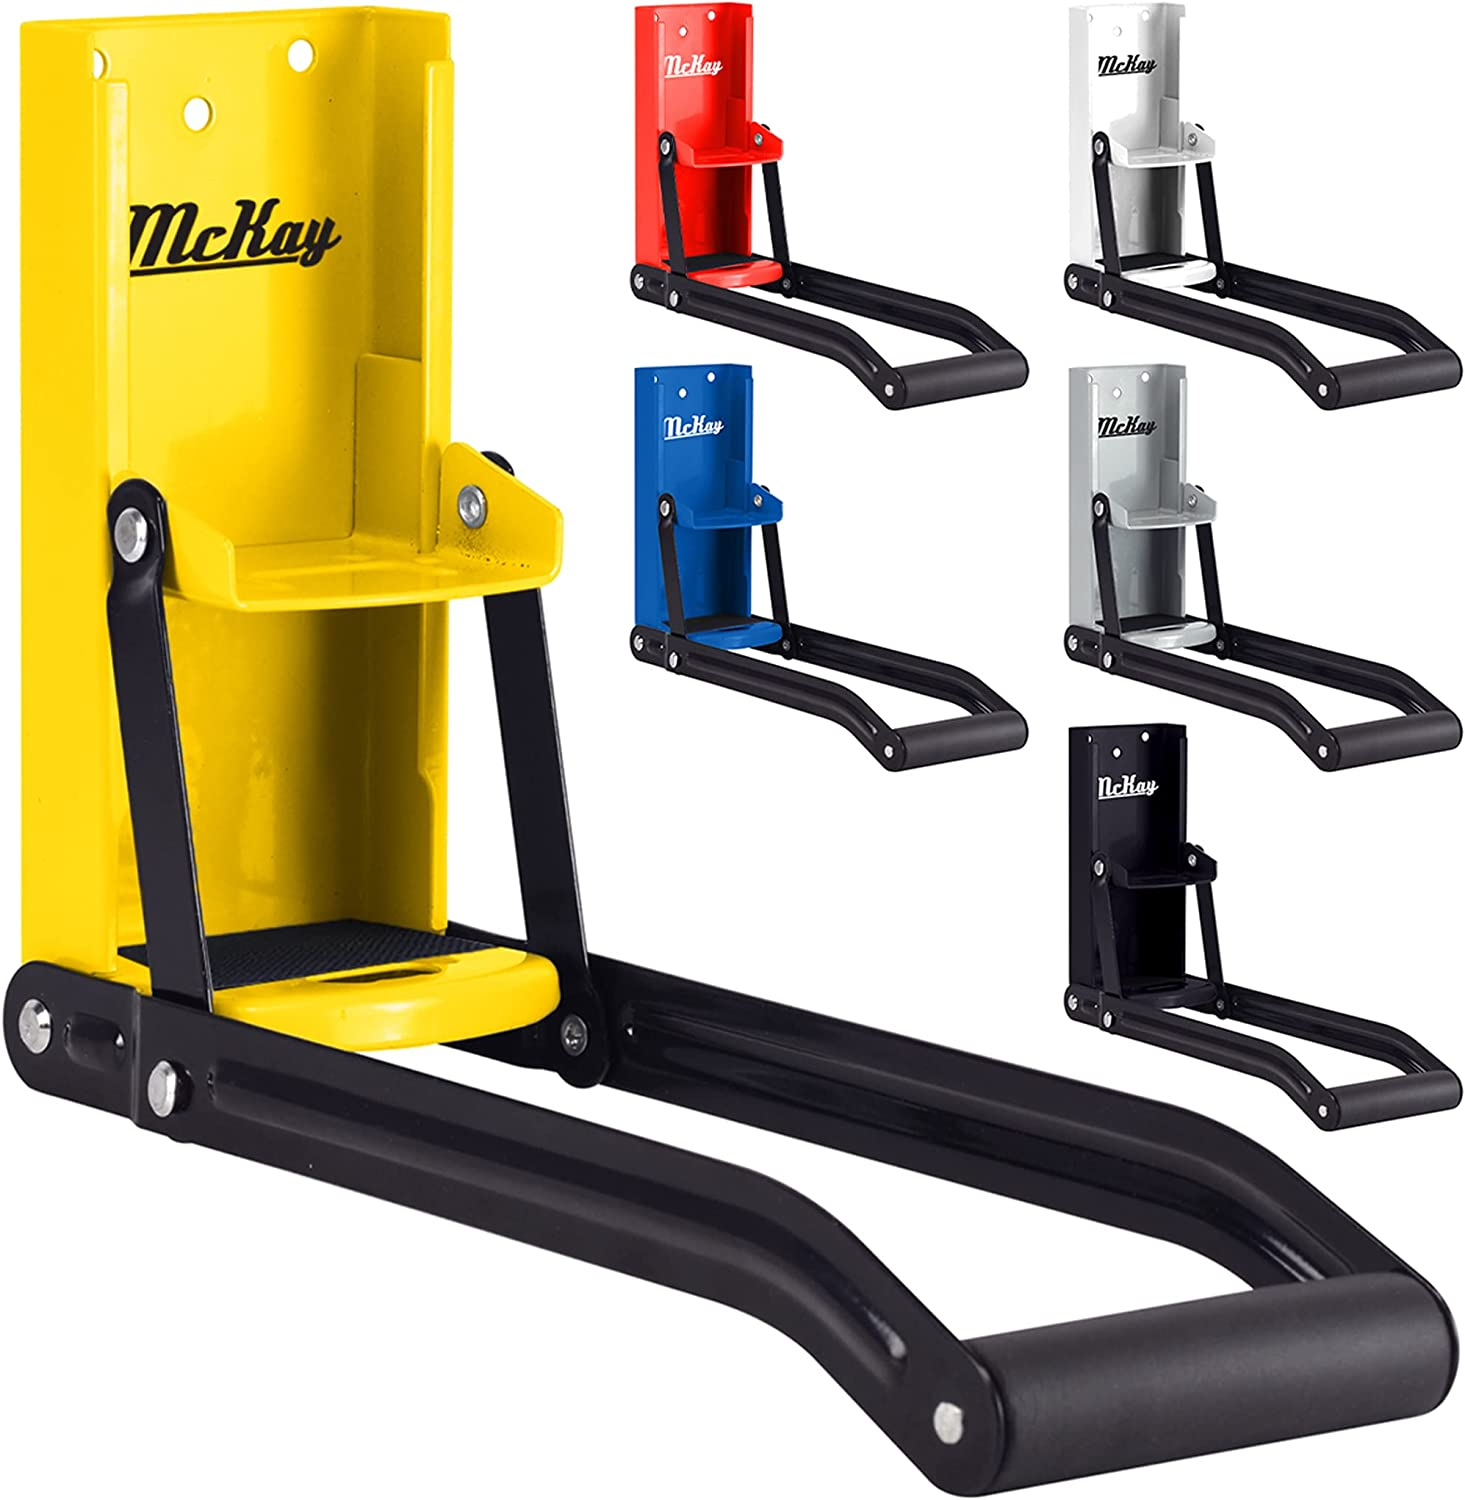 Mckay 16 Oz. Clearance SALE Limited time Limited time sale Metal Can Wall Crusher Smasher Mounted Heavy-Duty